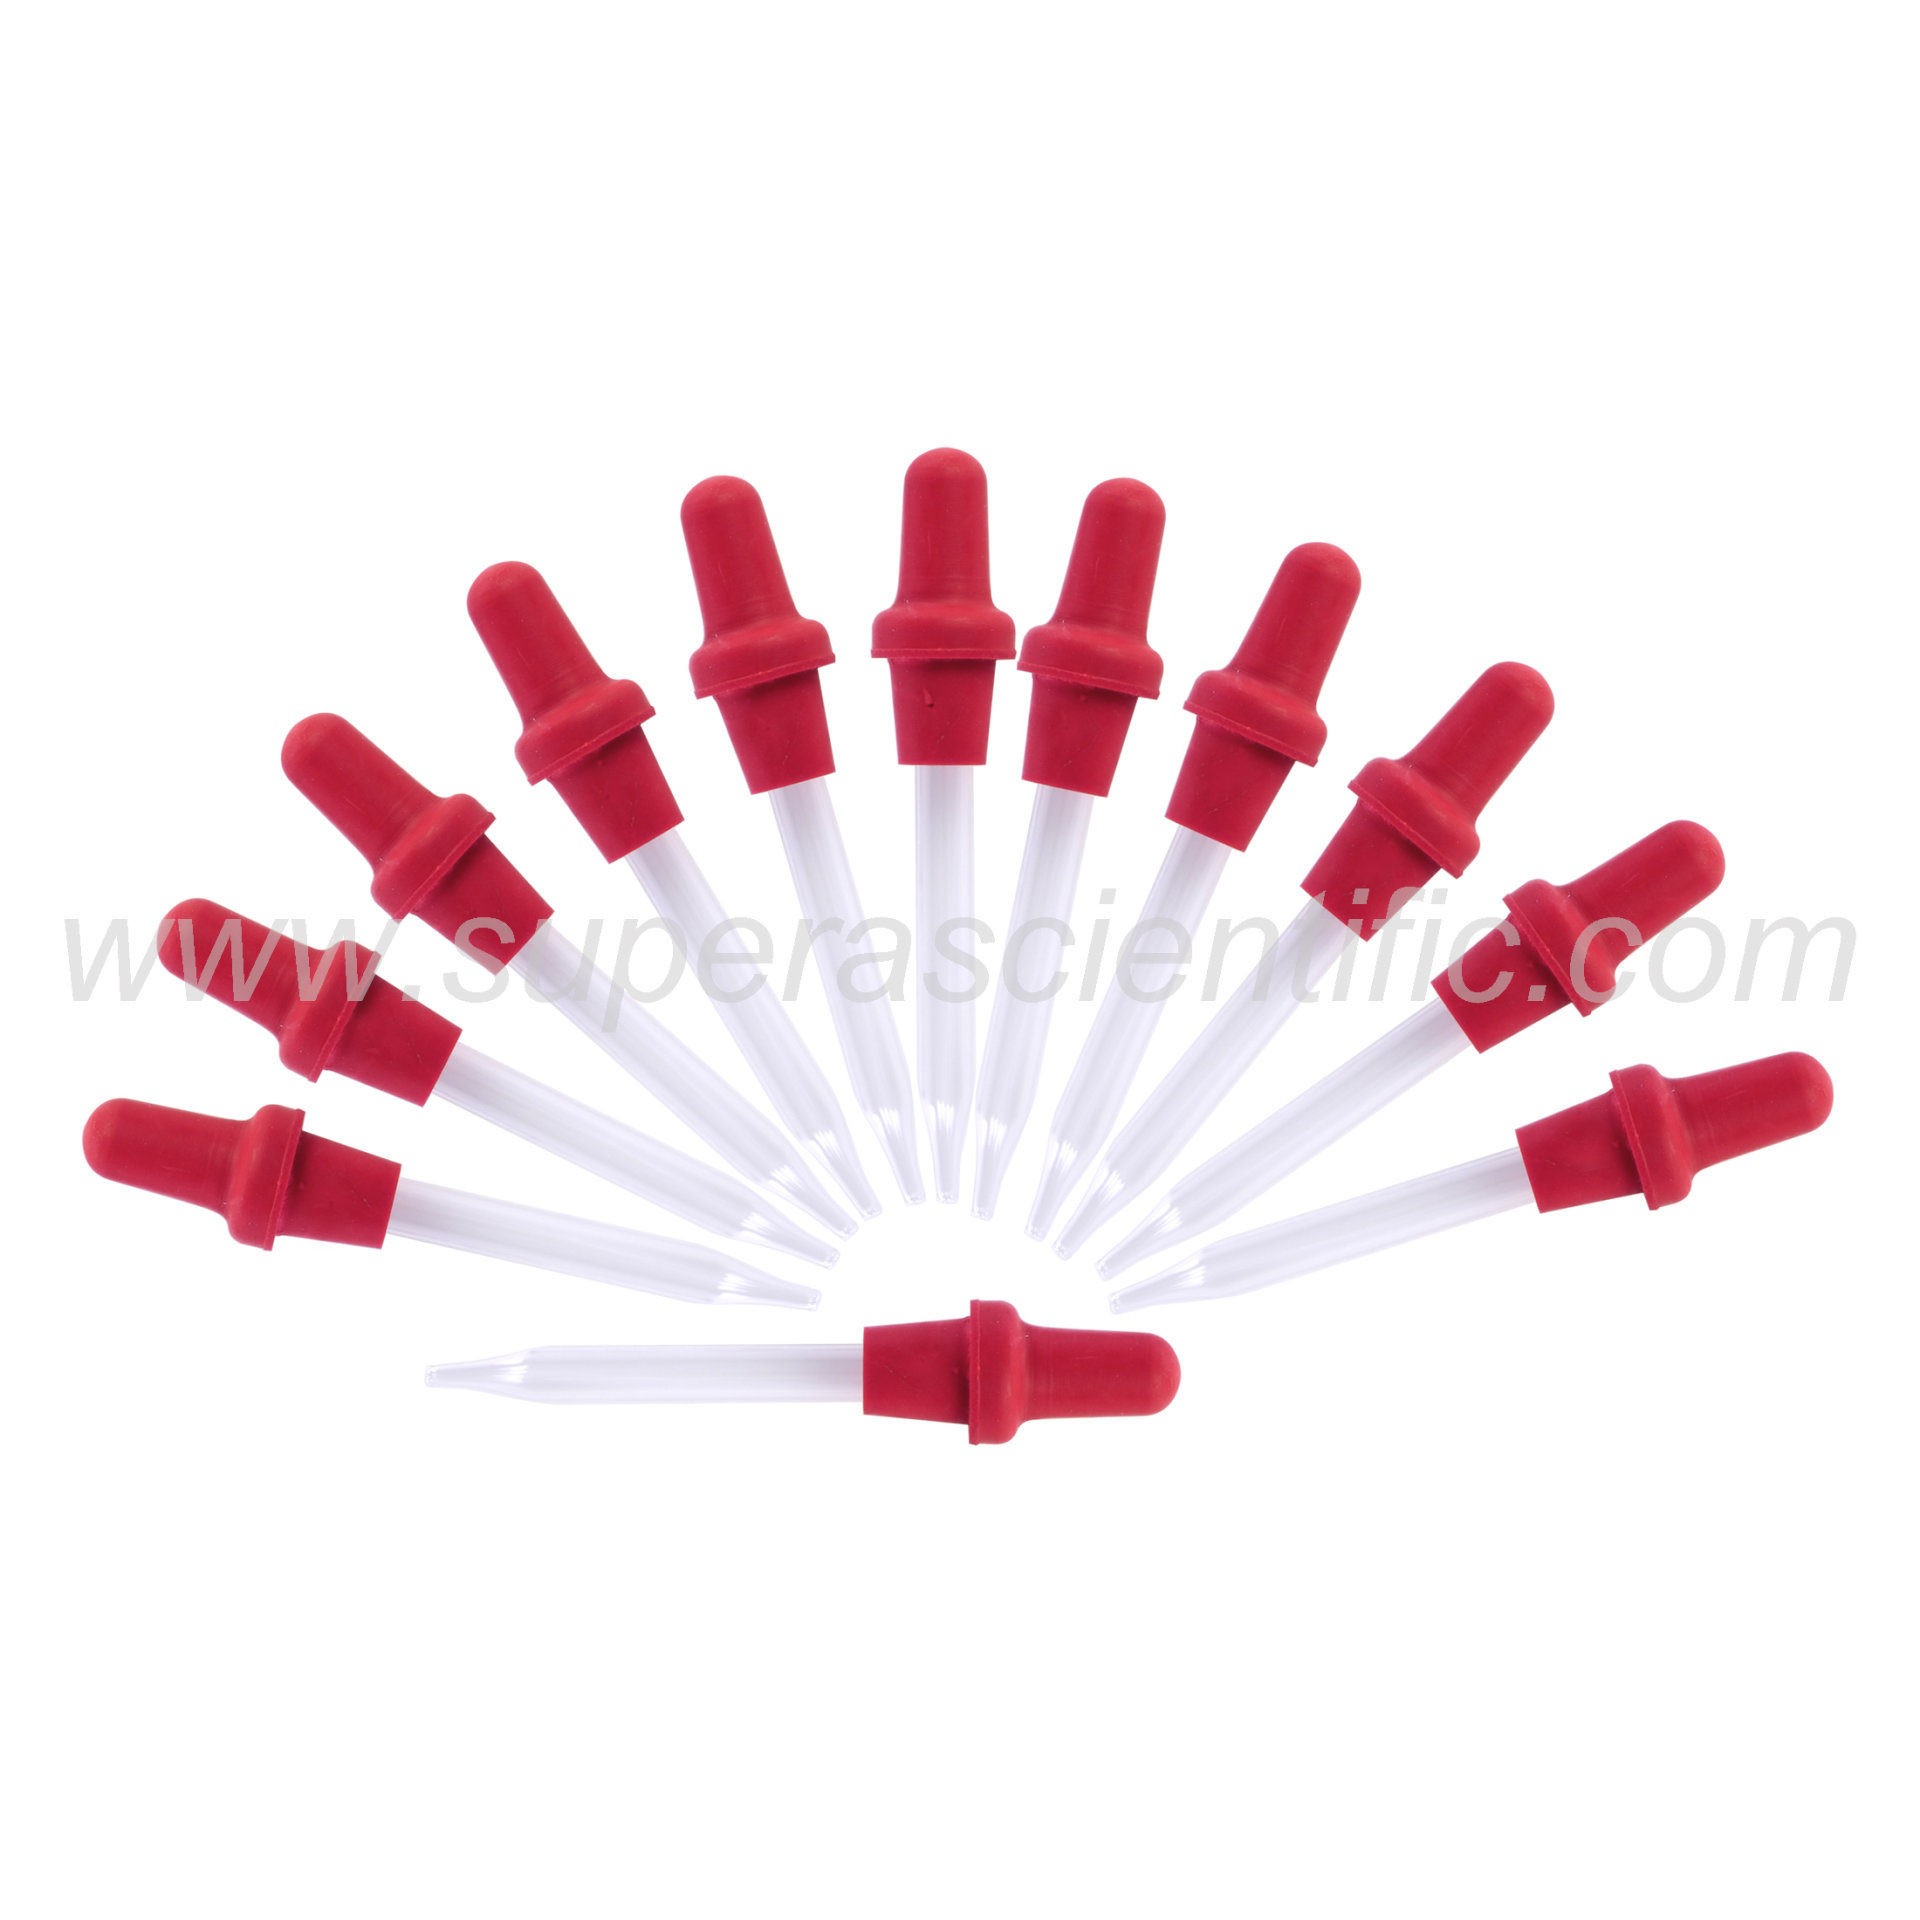 207-1-DZ Barnes Bottle Dropper with Straight Tip & Red Bulb